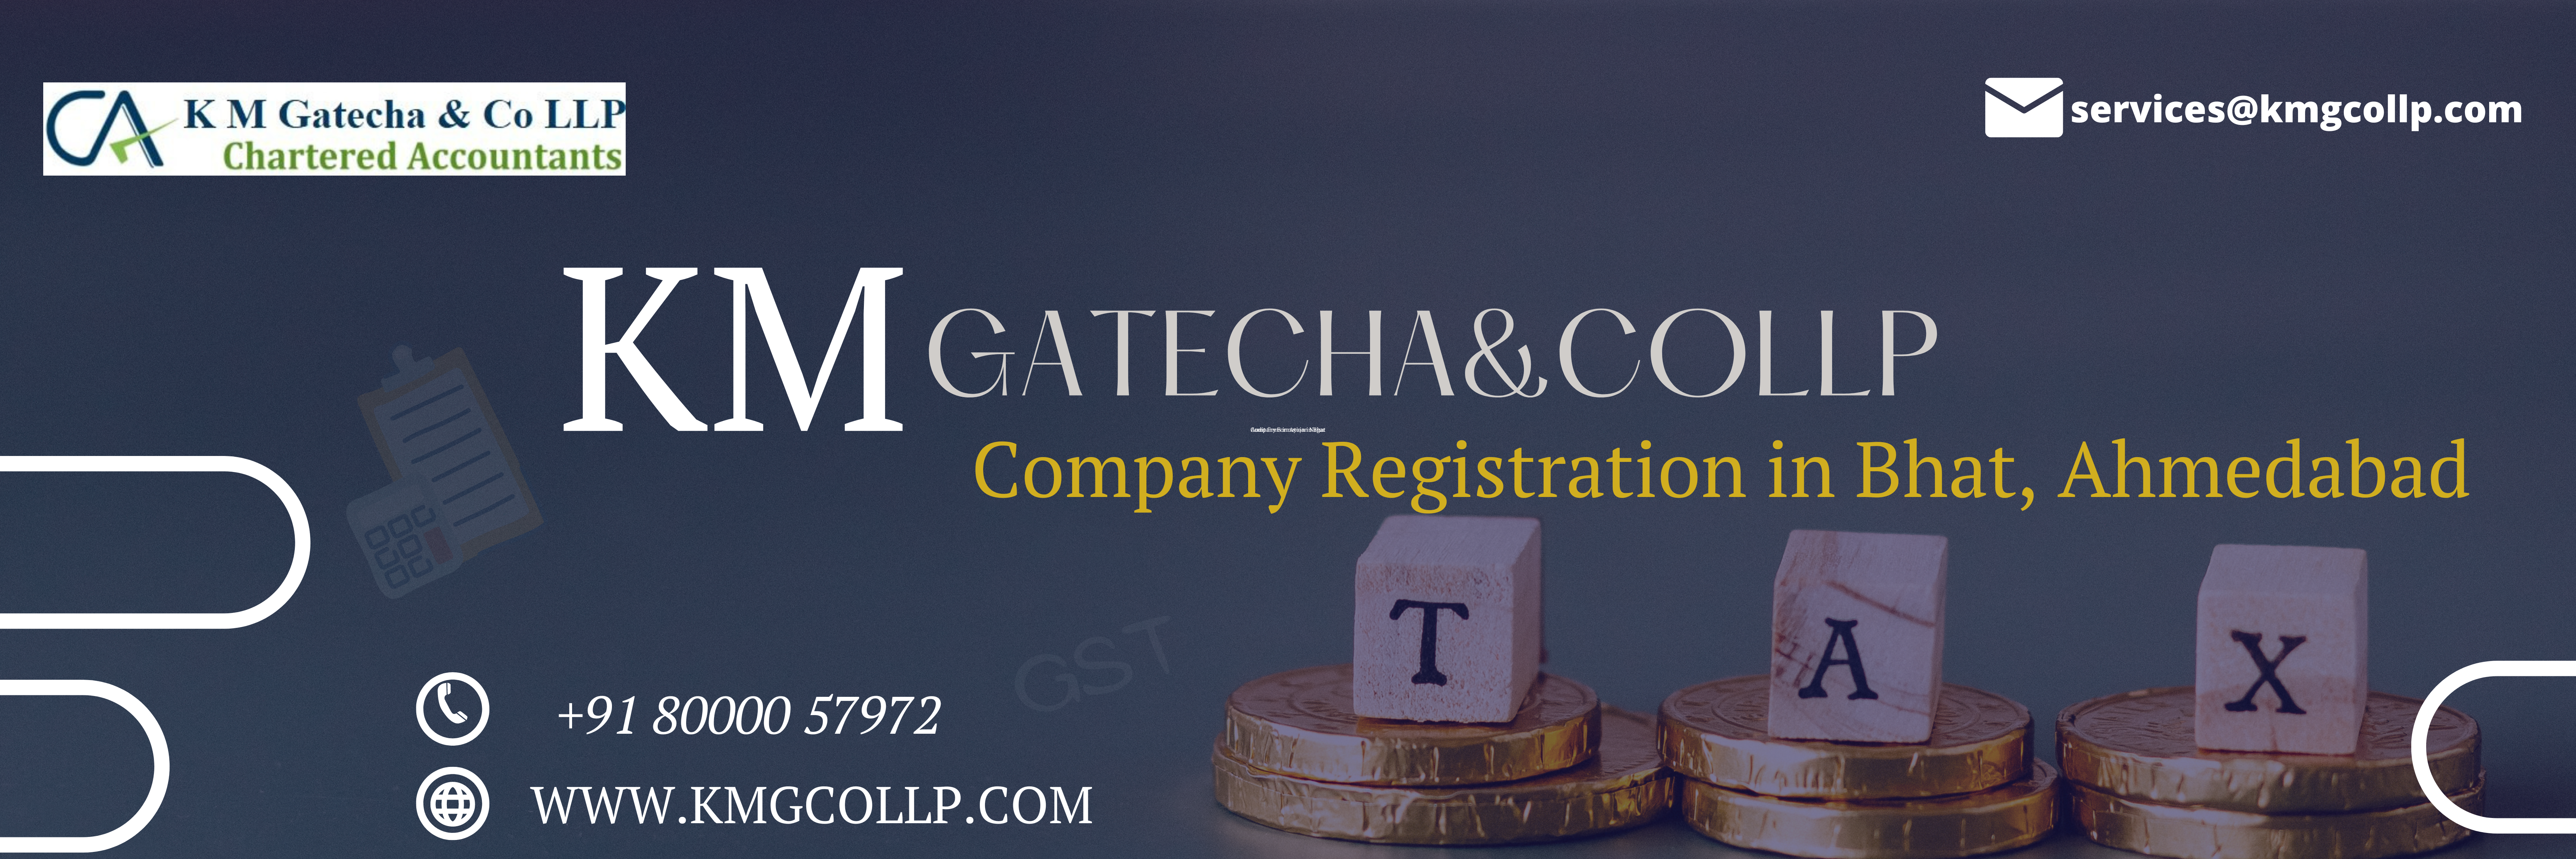 Company Registration in Bhat, Ahmedabad